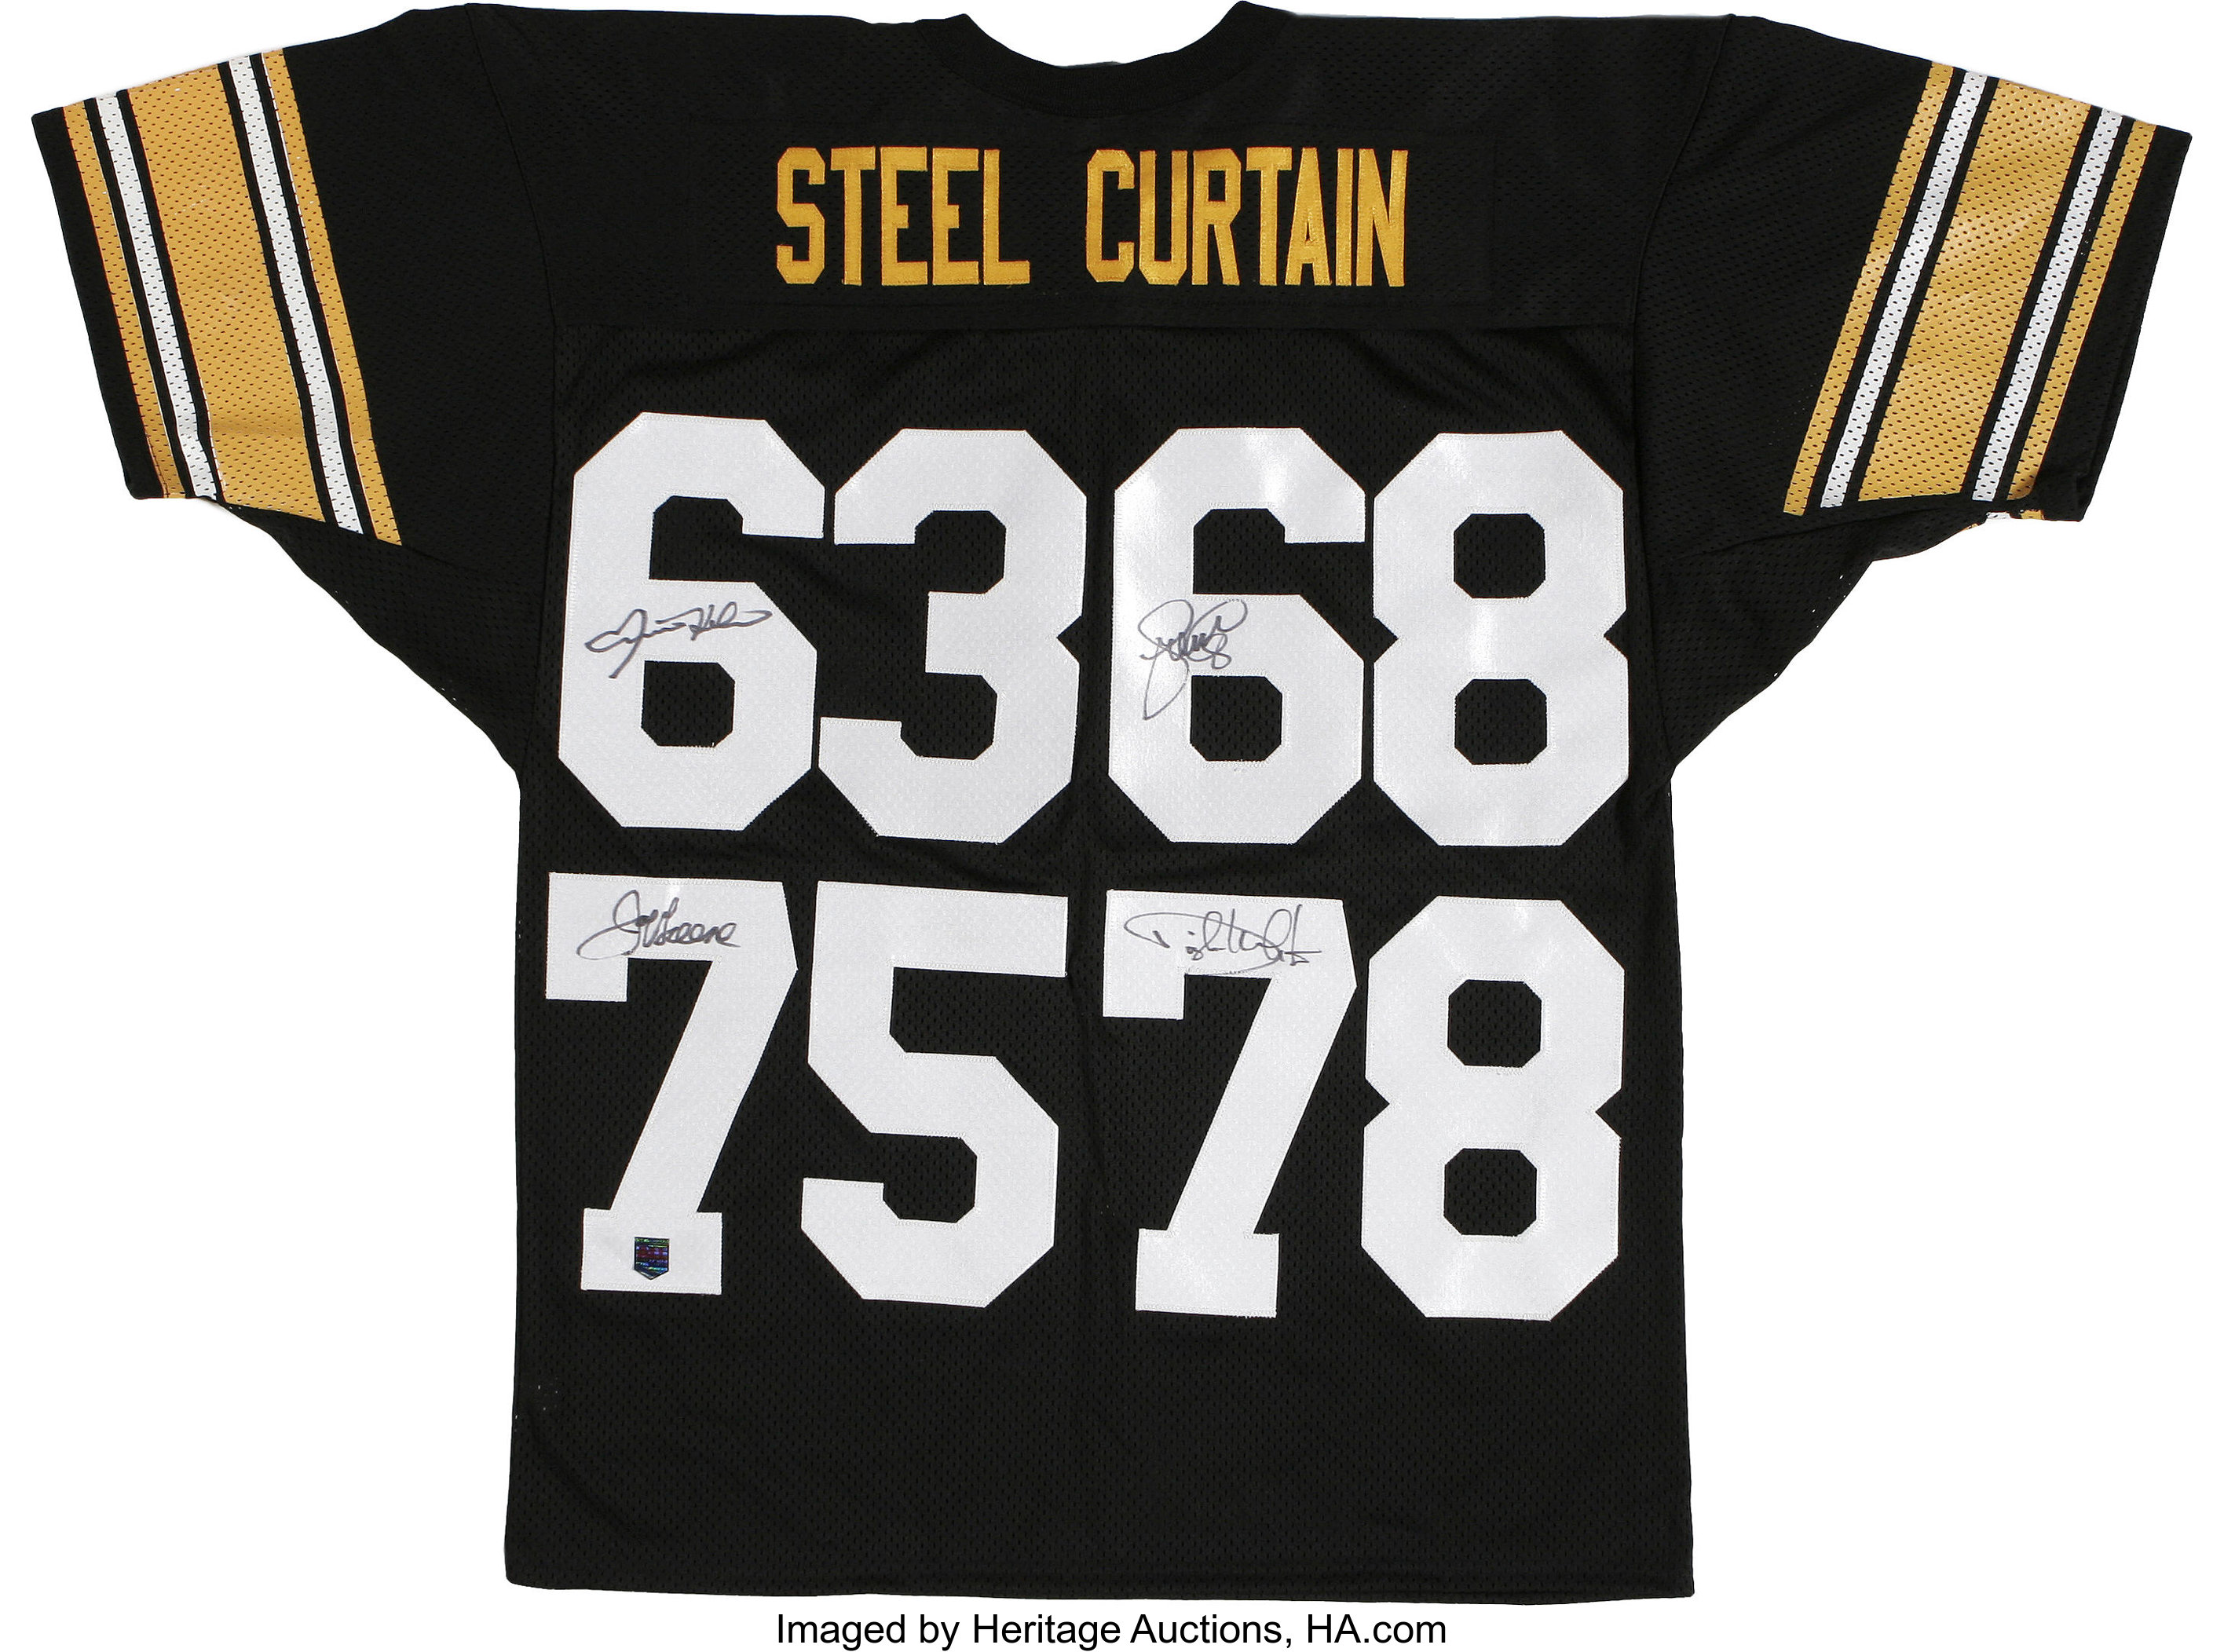 STEEL CURTAIN AUTOGRAPHED PITTSBURGH STEELERS JERSEY AASH READ 34